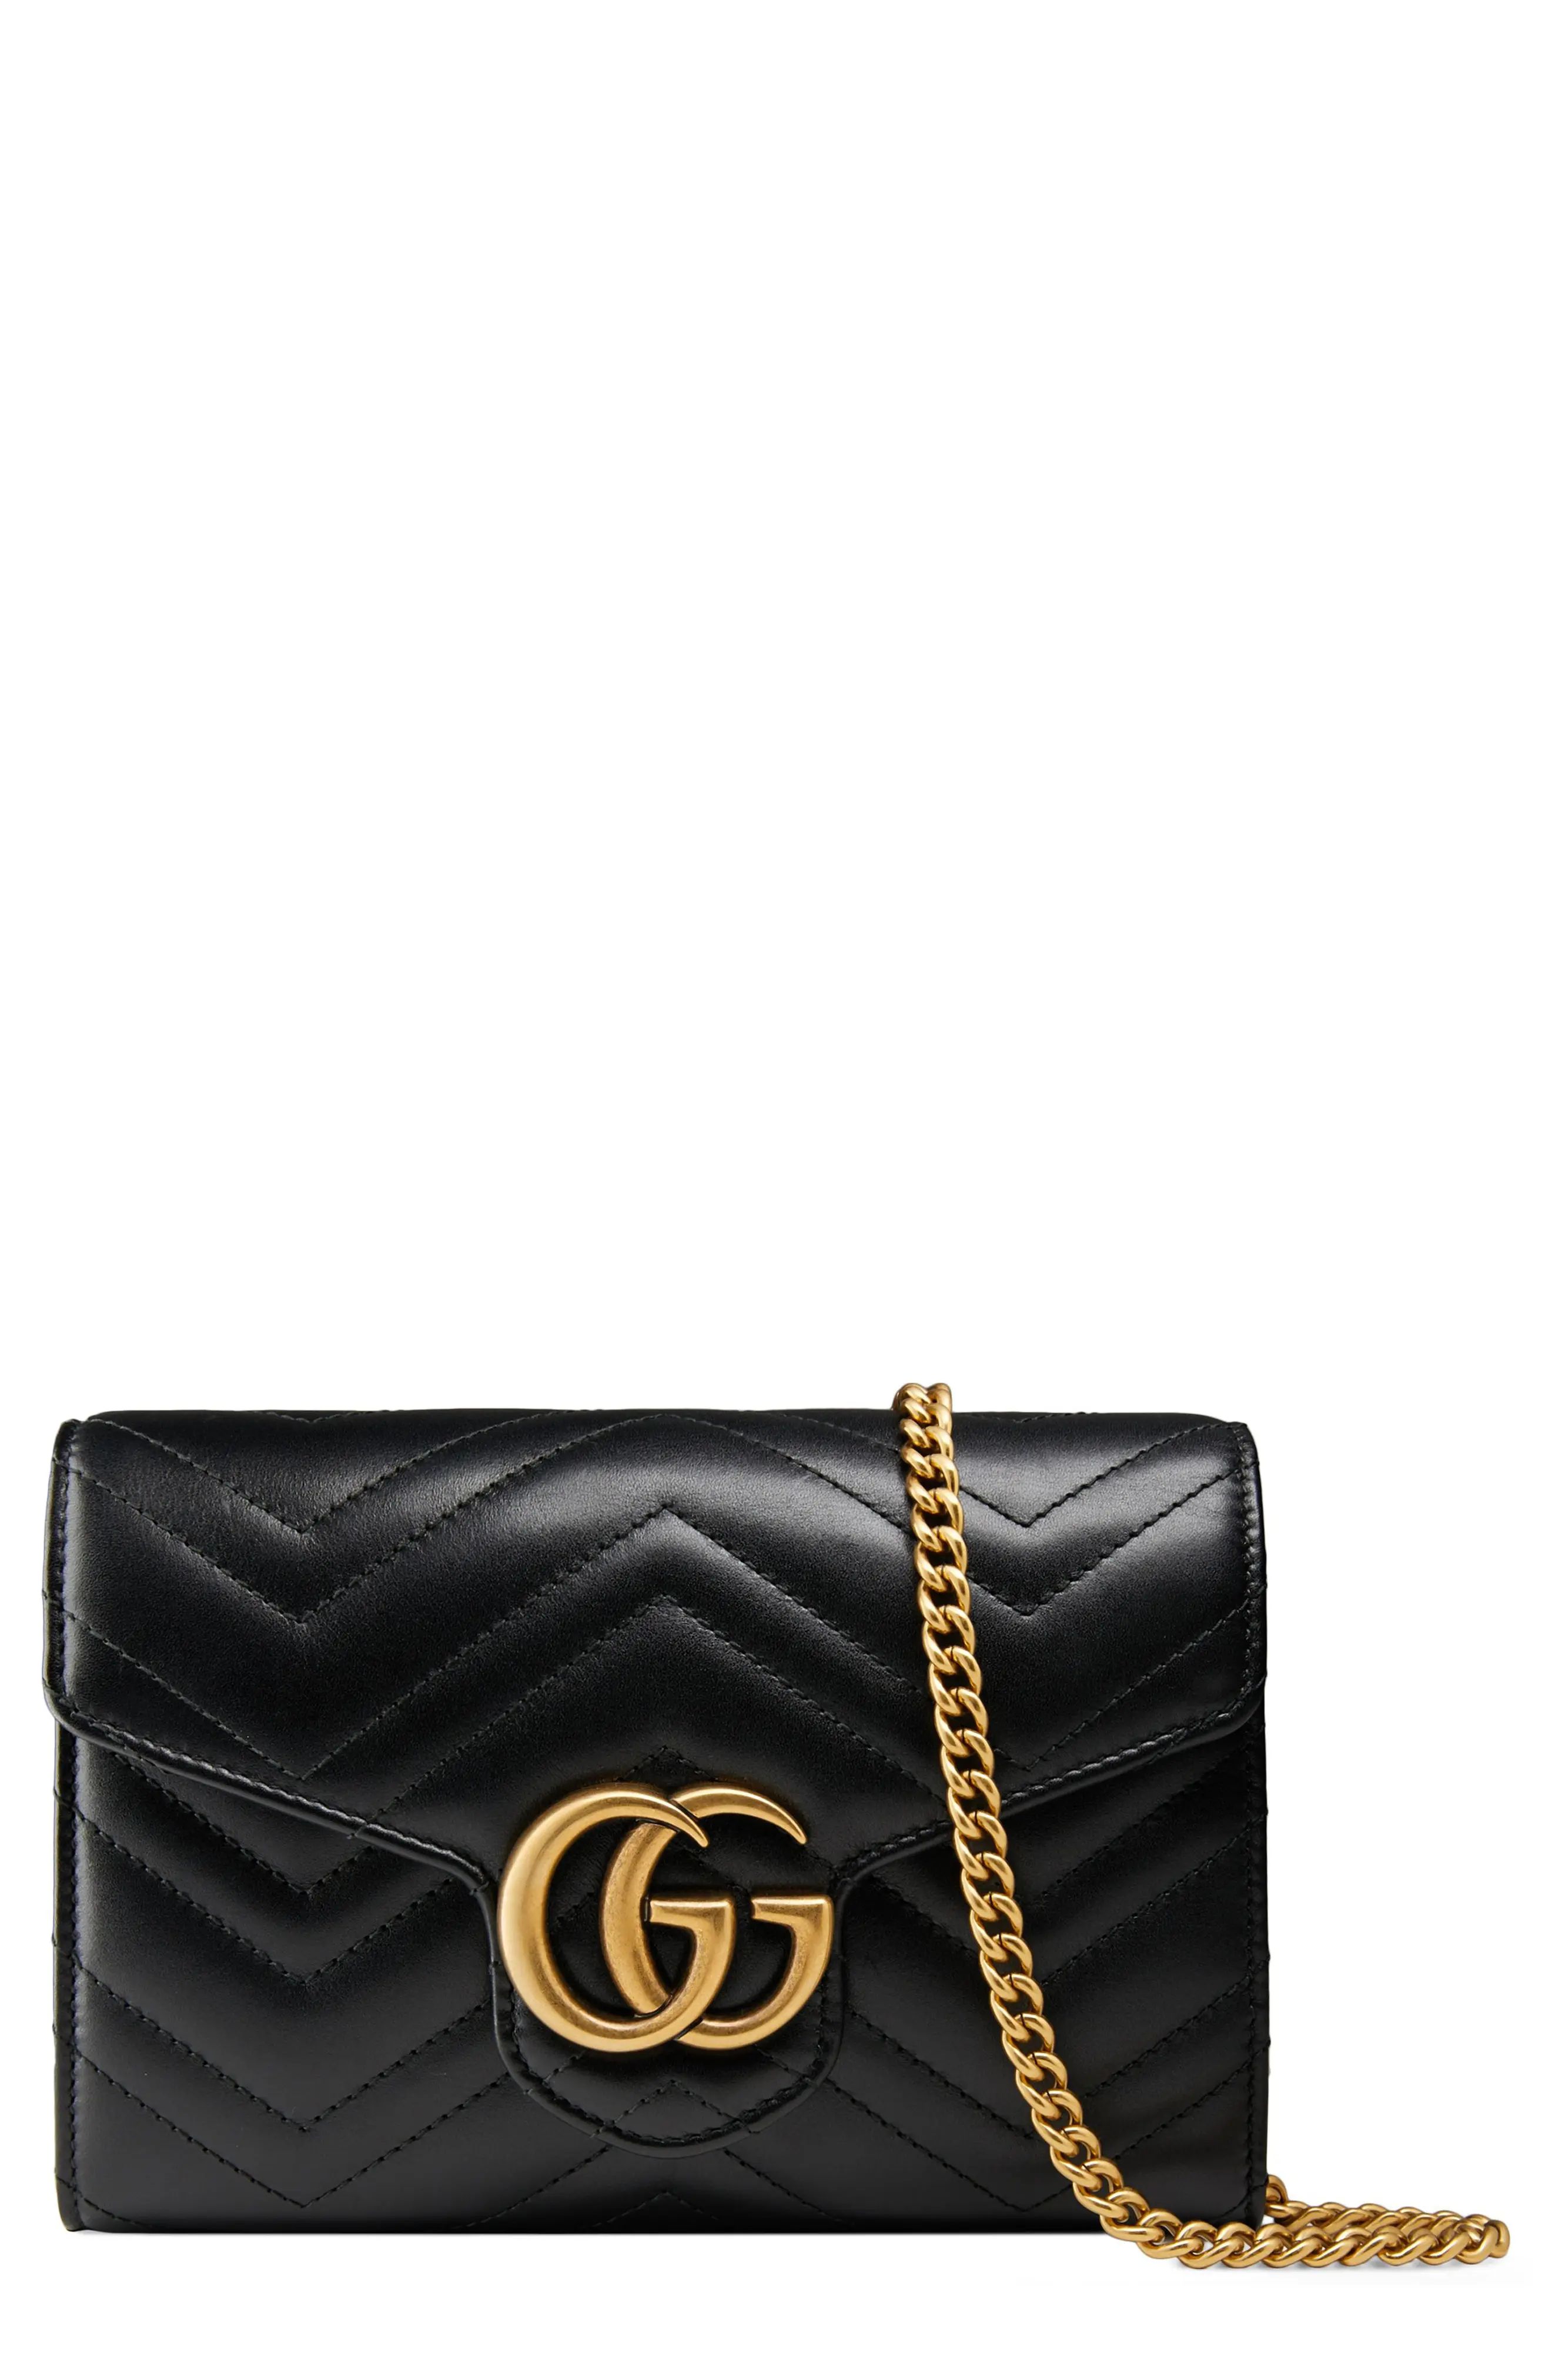 Women's Gucci Gg Matelasse Leather Wallet On A Chain - Black | Nordstrom